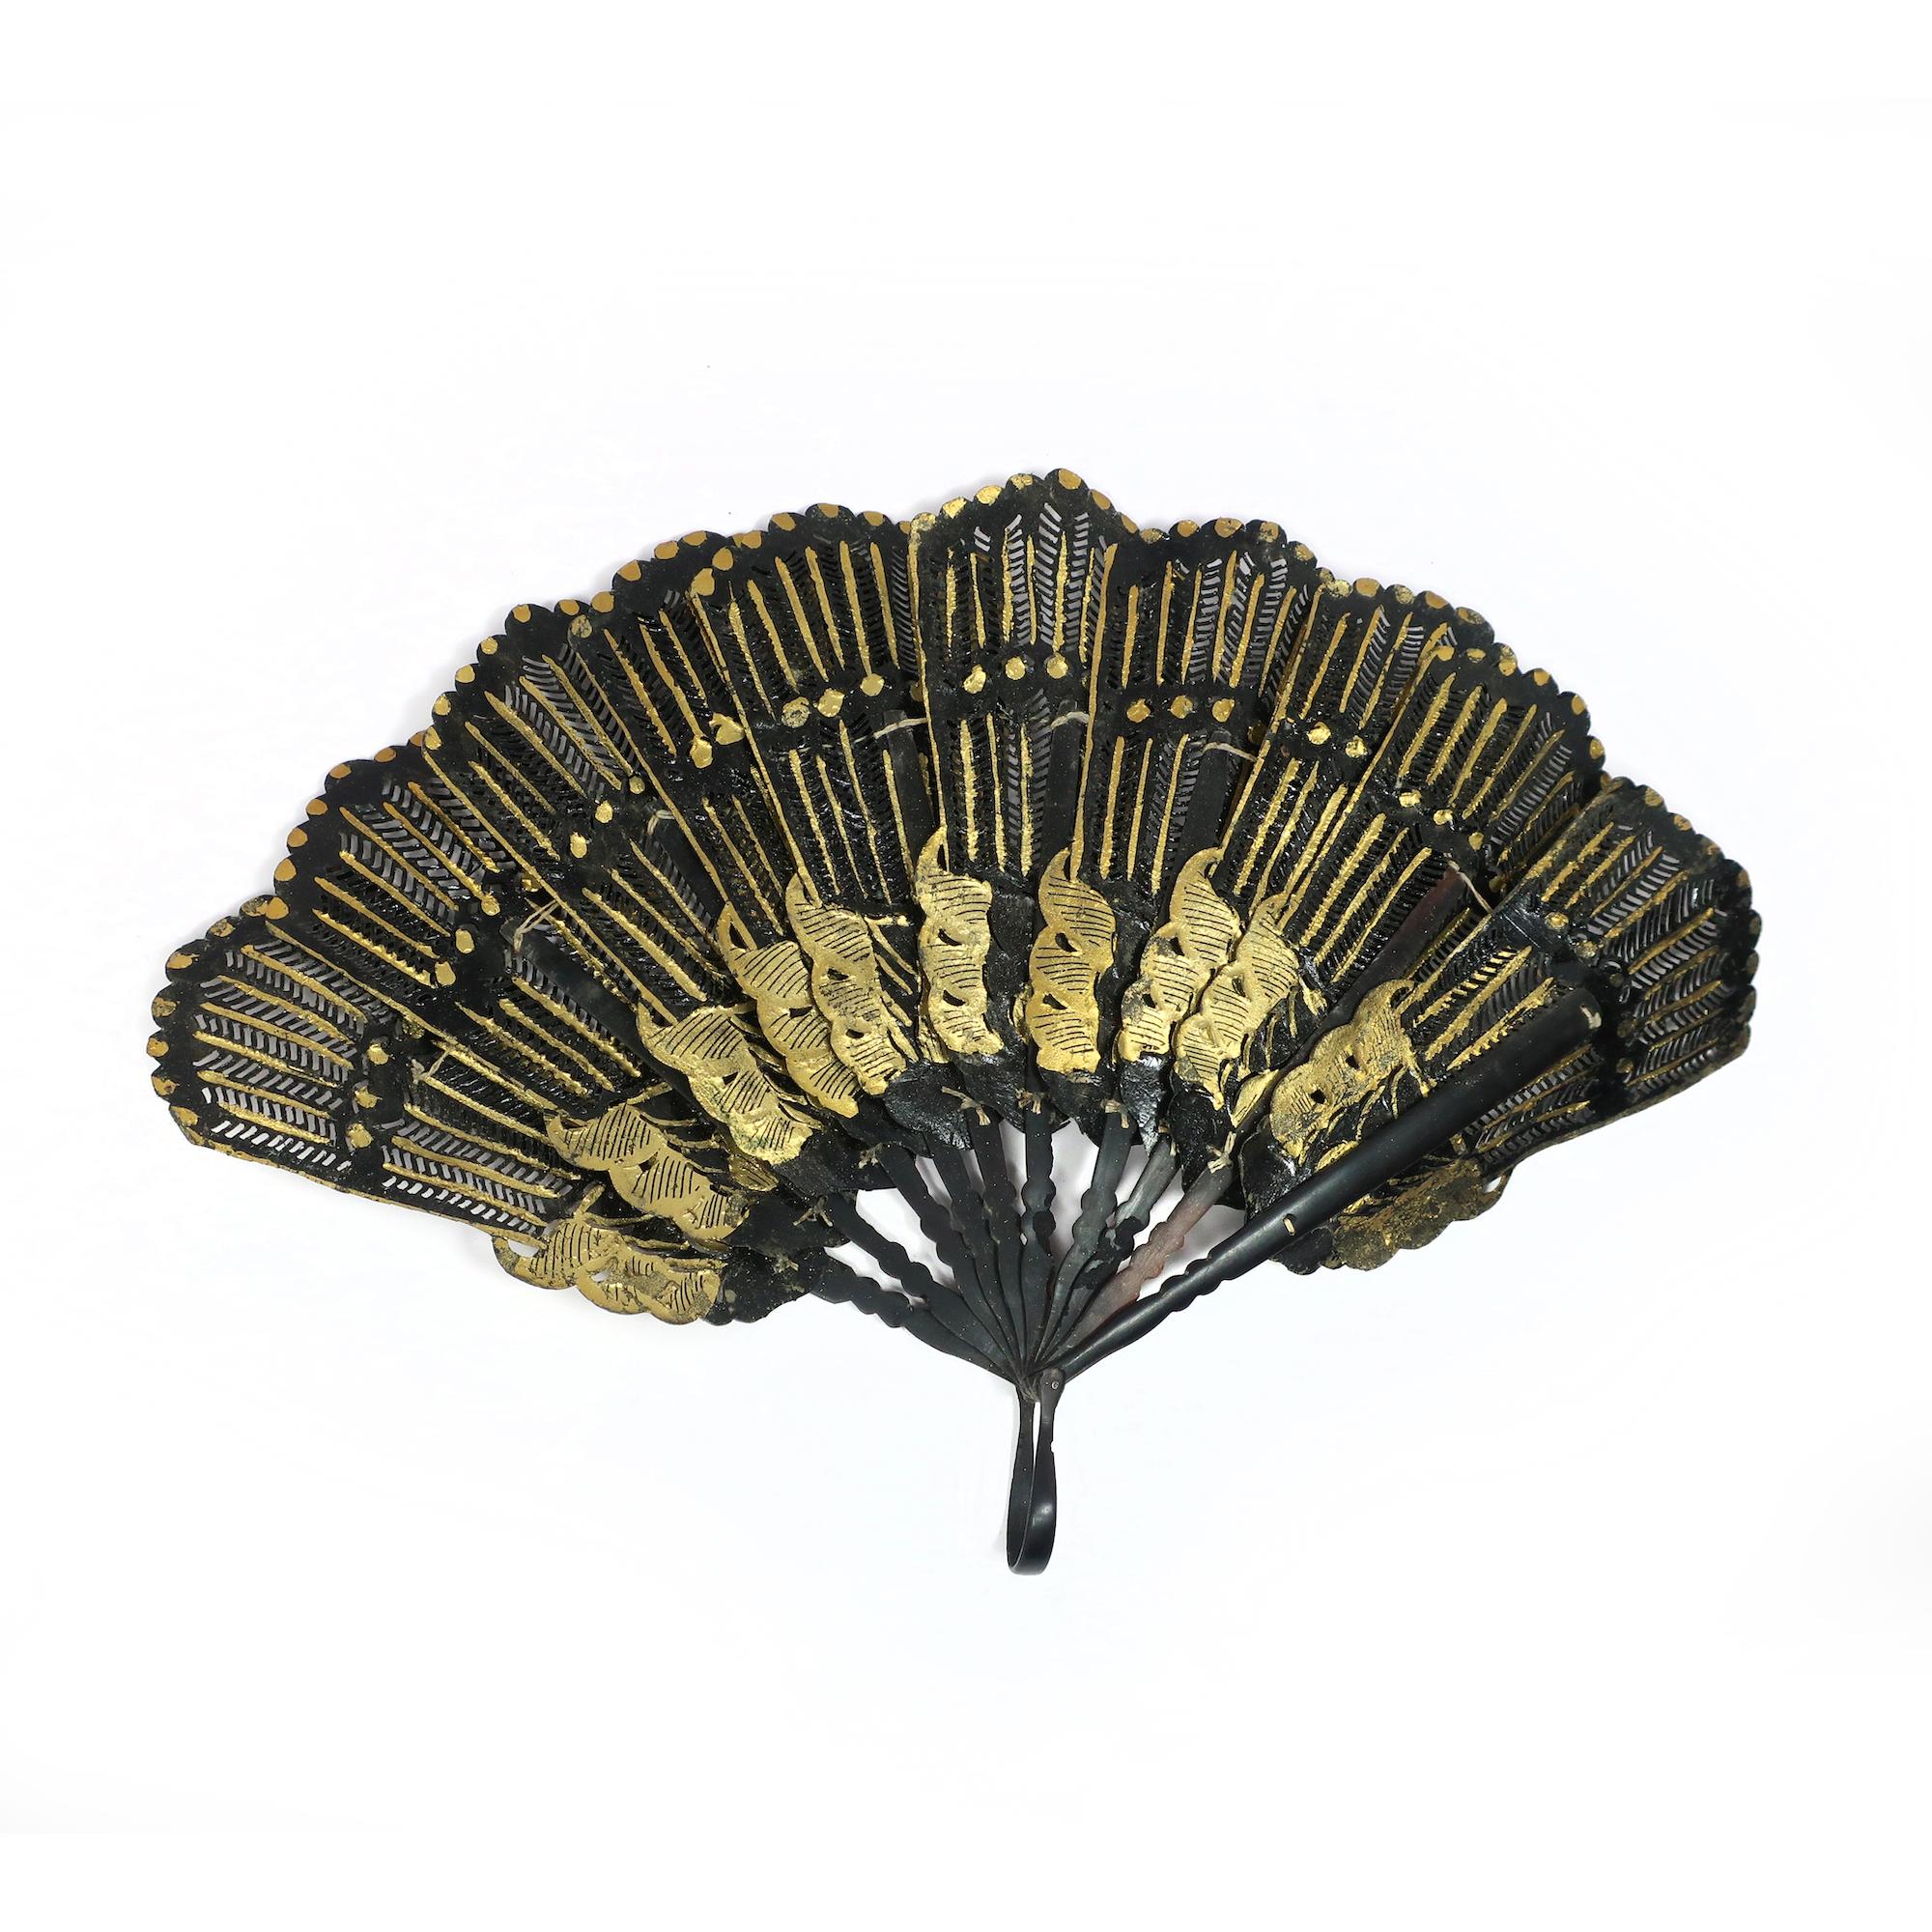 A stunning and rare example of a 19th century hand fan, made of black leather and decorated with gold leaf. The fan has a brisé style, meaning that it consists of narrow sticks that are connected at the top and can be folded together. The sticks are